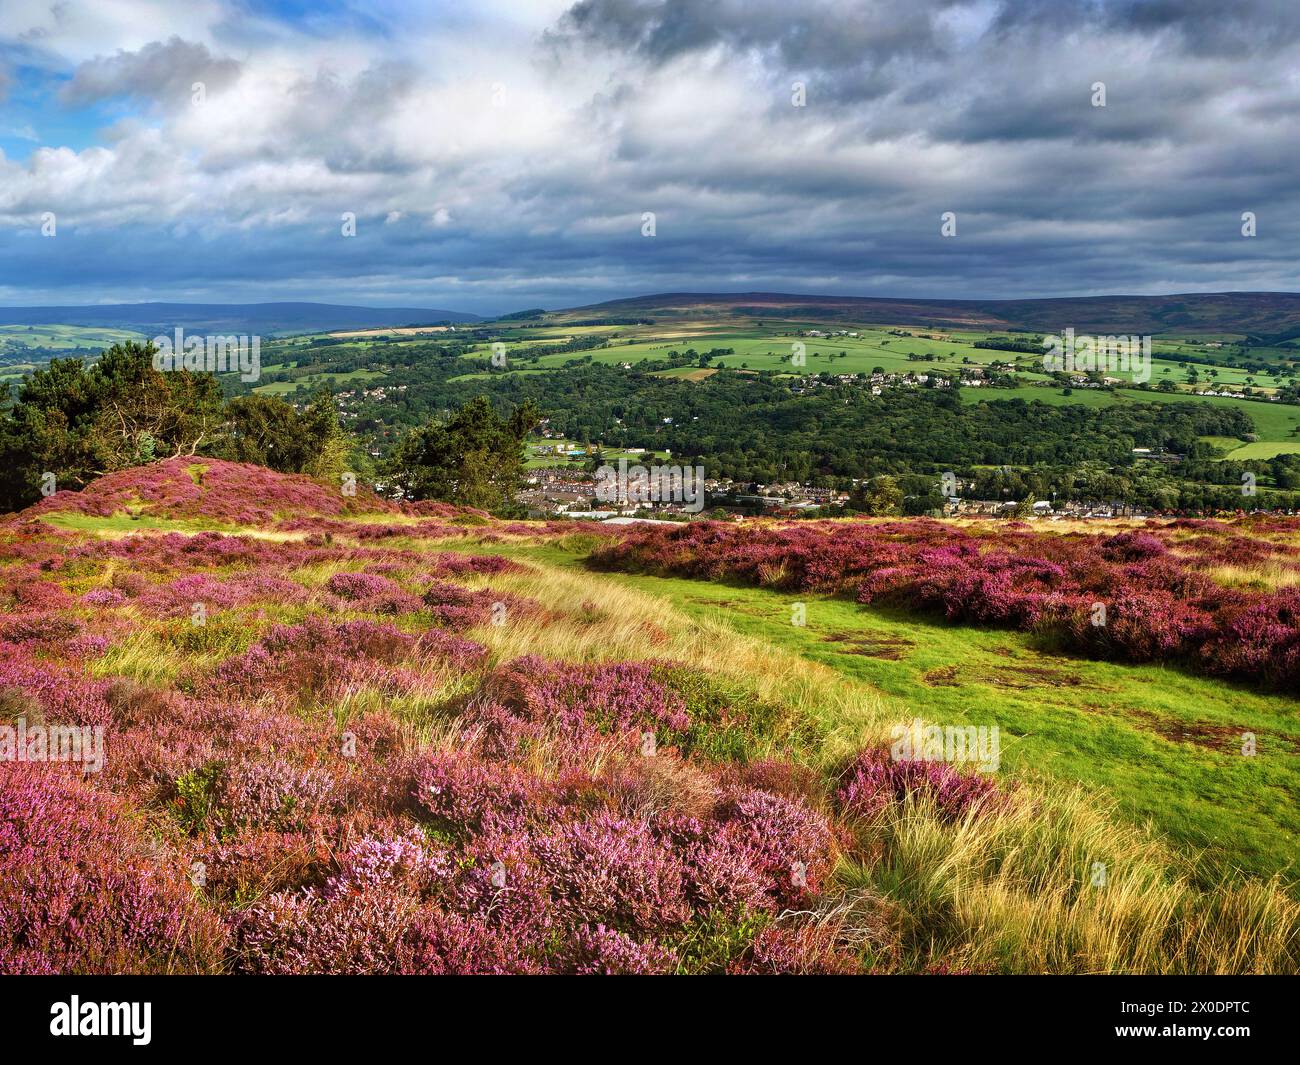 UK, West Yorkshire, Ilkley, Ilkley Moor view from near the Hanging Stones. Stock Photo